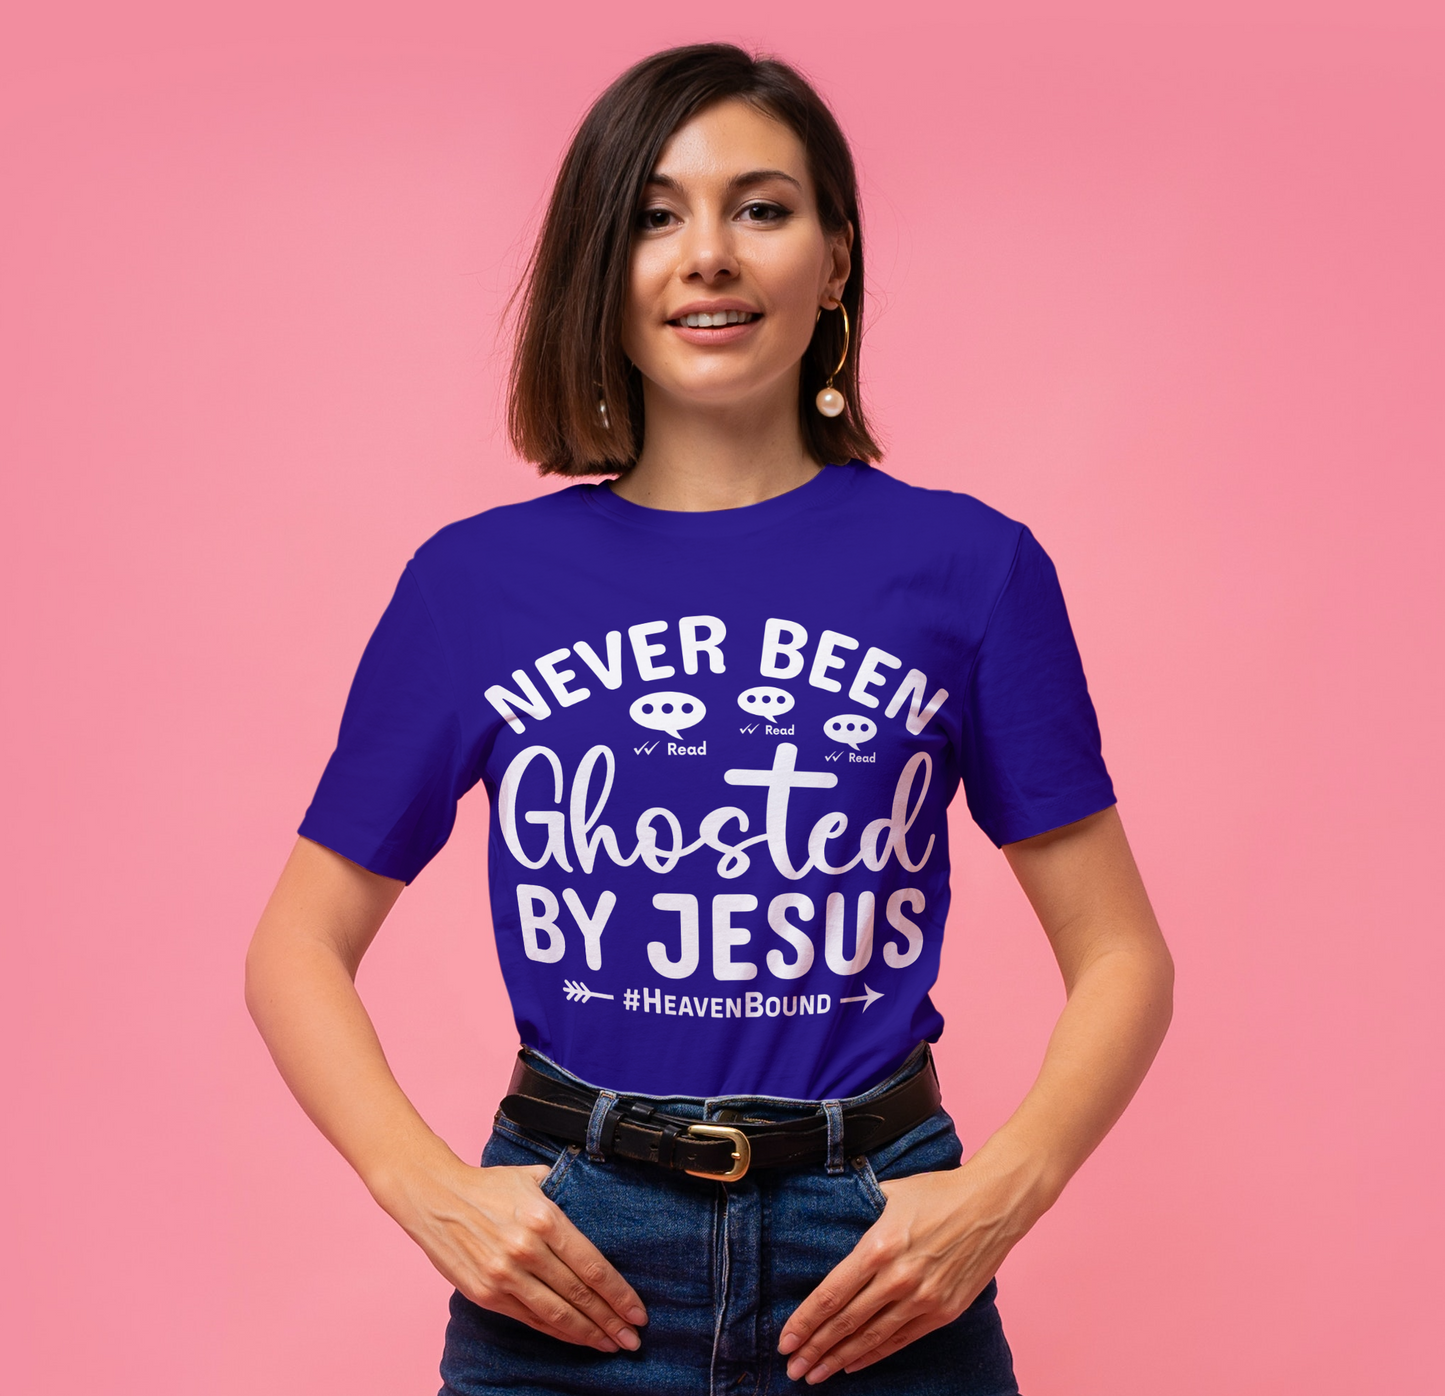 Never Been Ghosted By Jesus-Unisex Short Sleeve Tee